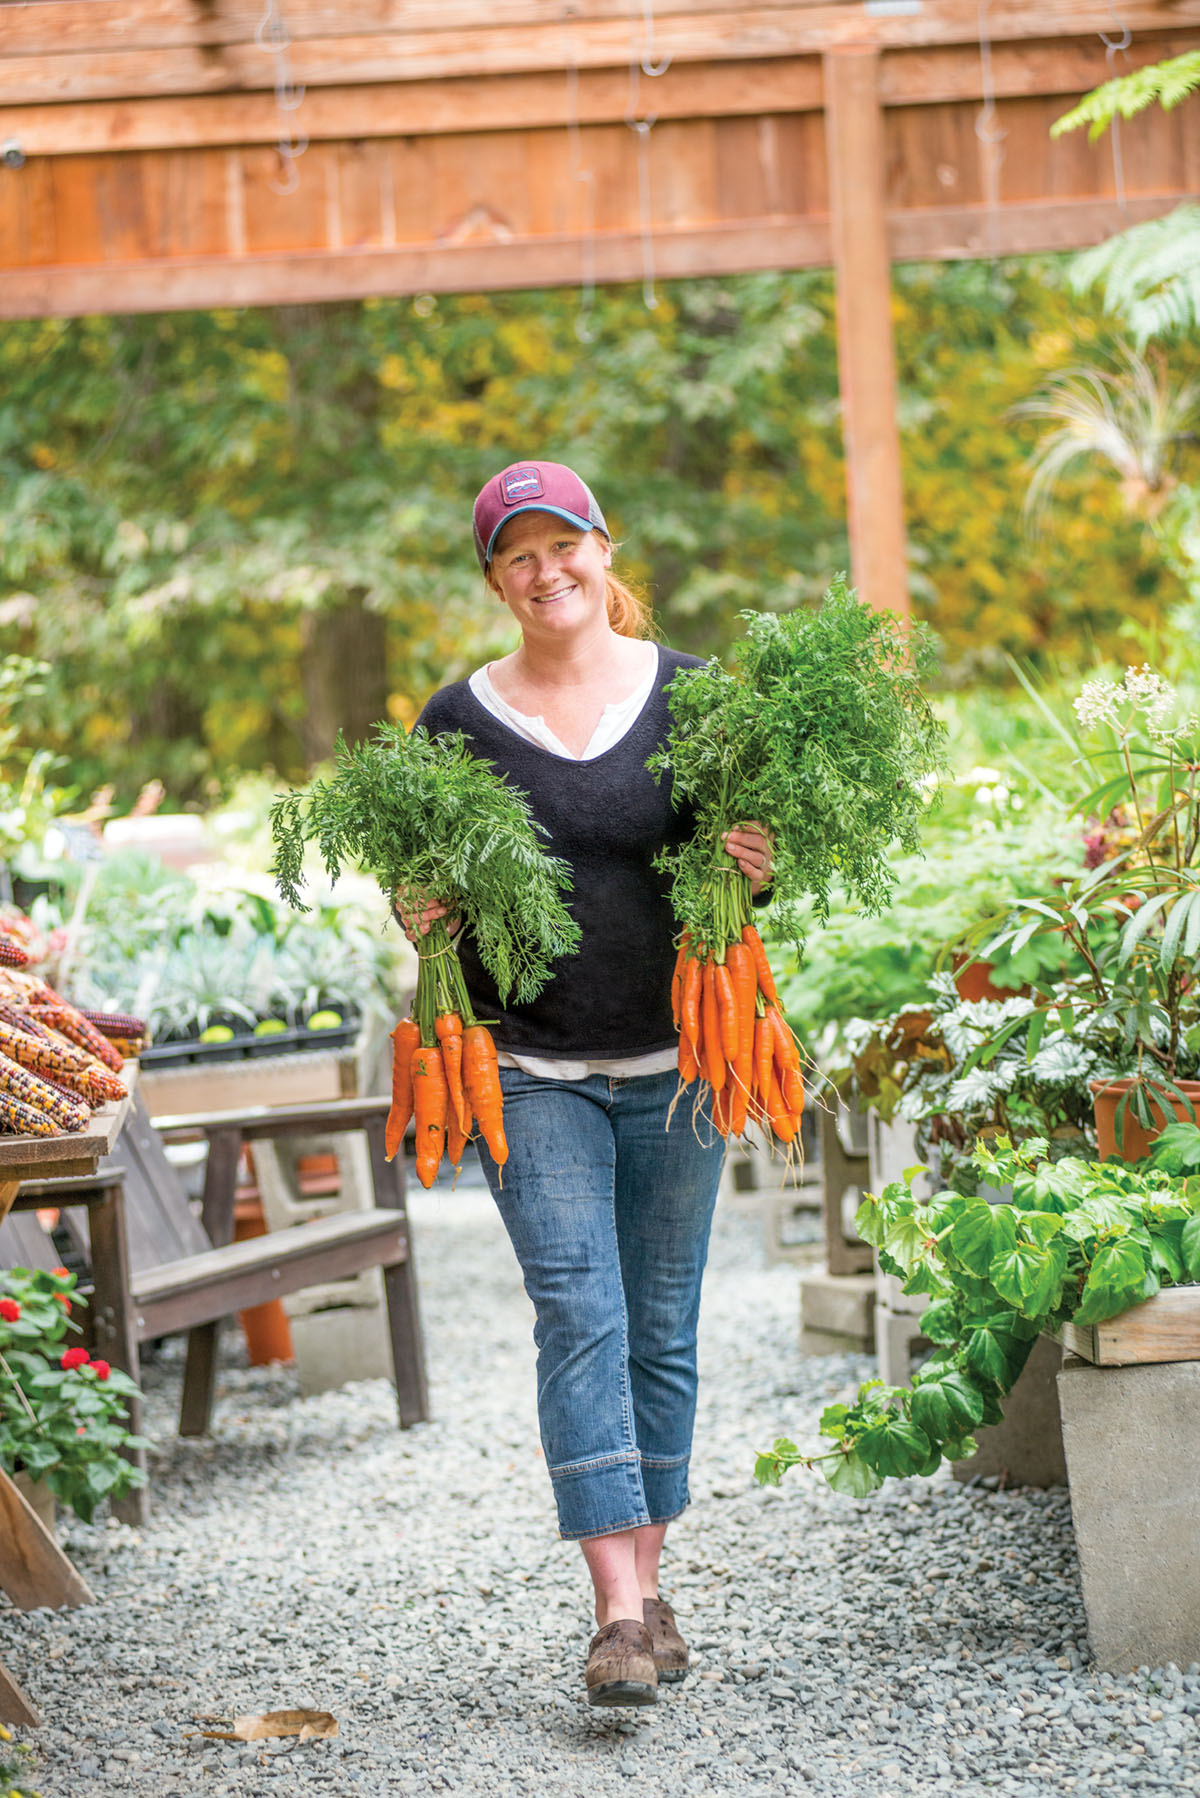 Allie Boeri, wearing her red hair in a ponytail under a ballcap, walks through the open-air farmers market carrying a bunch of carrots in each hand